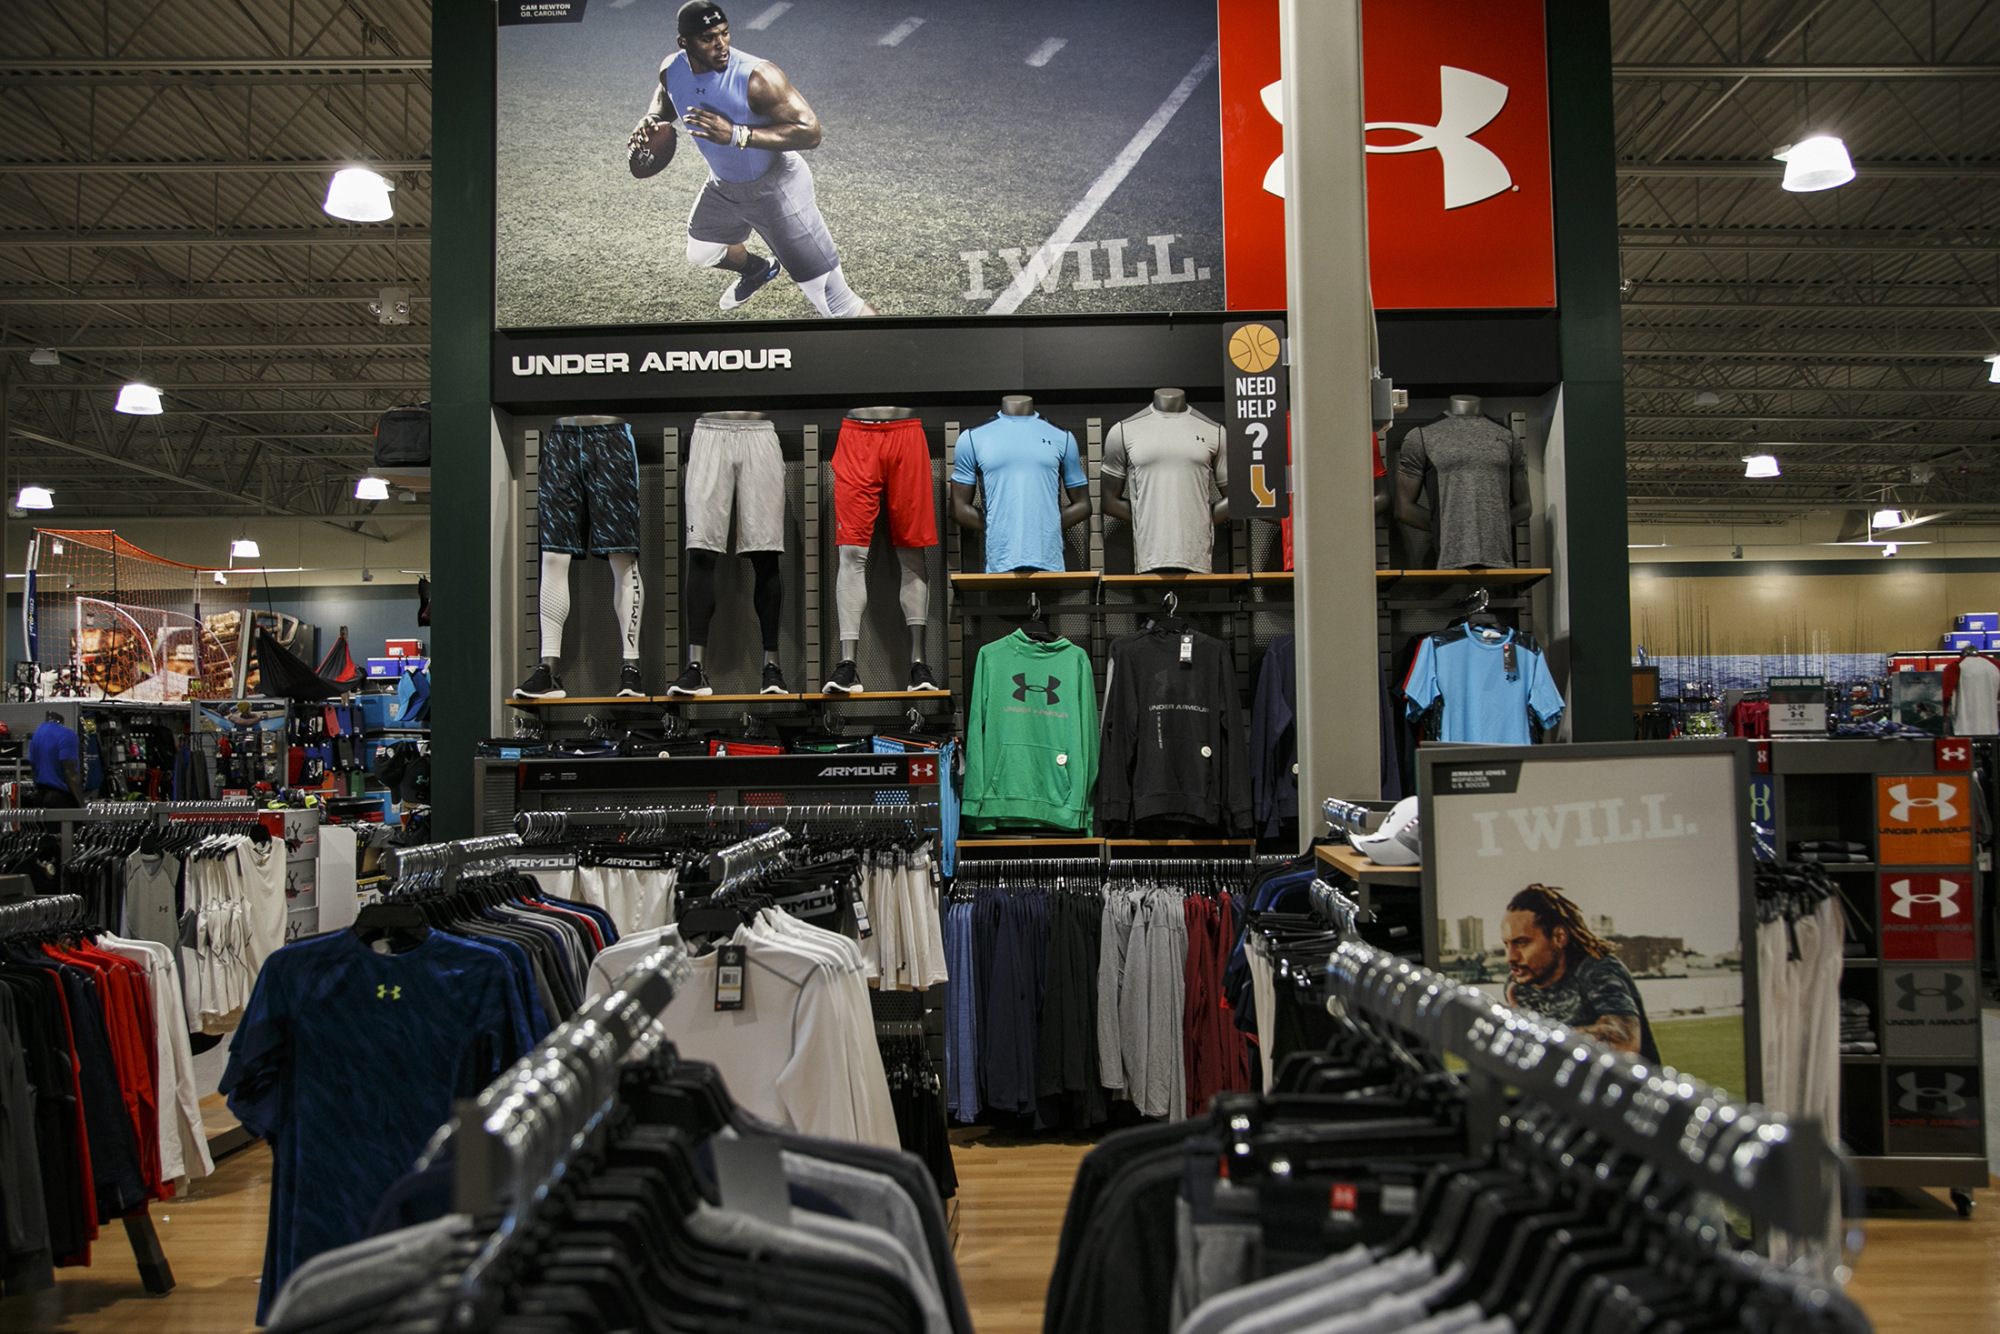 Under Armour Braces for First Loss as Scrutiny of CEO Mounts - Bloomberg